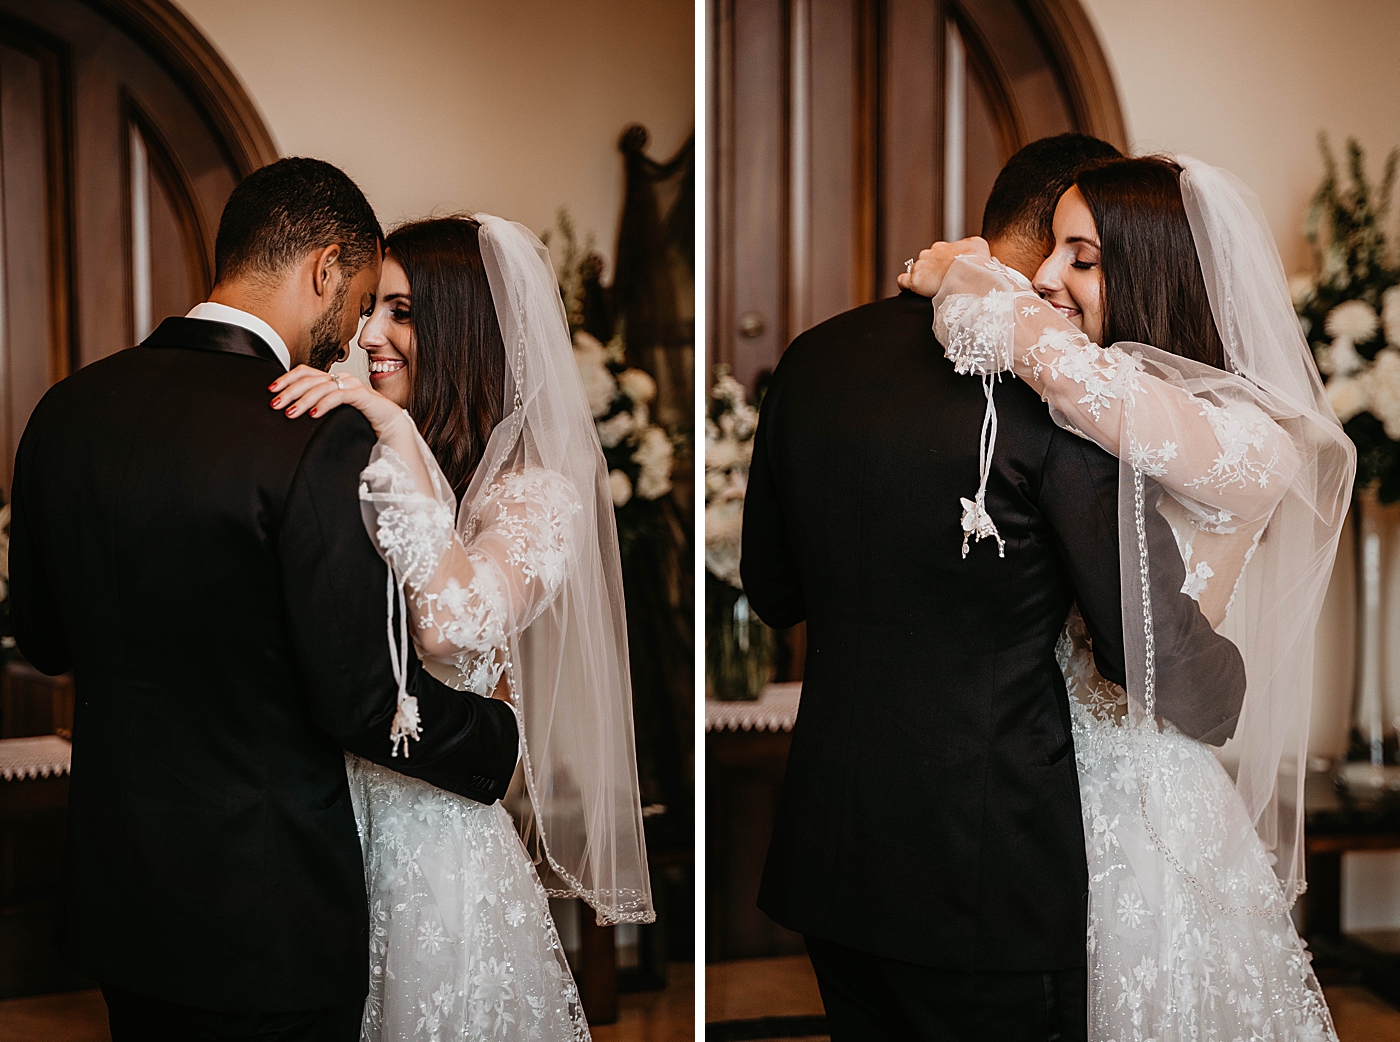 Bride and Groom having their first dance Intimate Home Wedding captured by South Florida Wedding Photographer Krystal Capone Photography